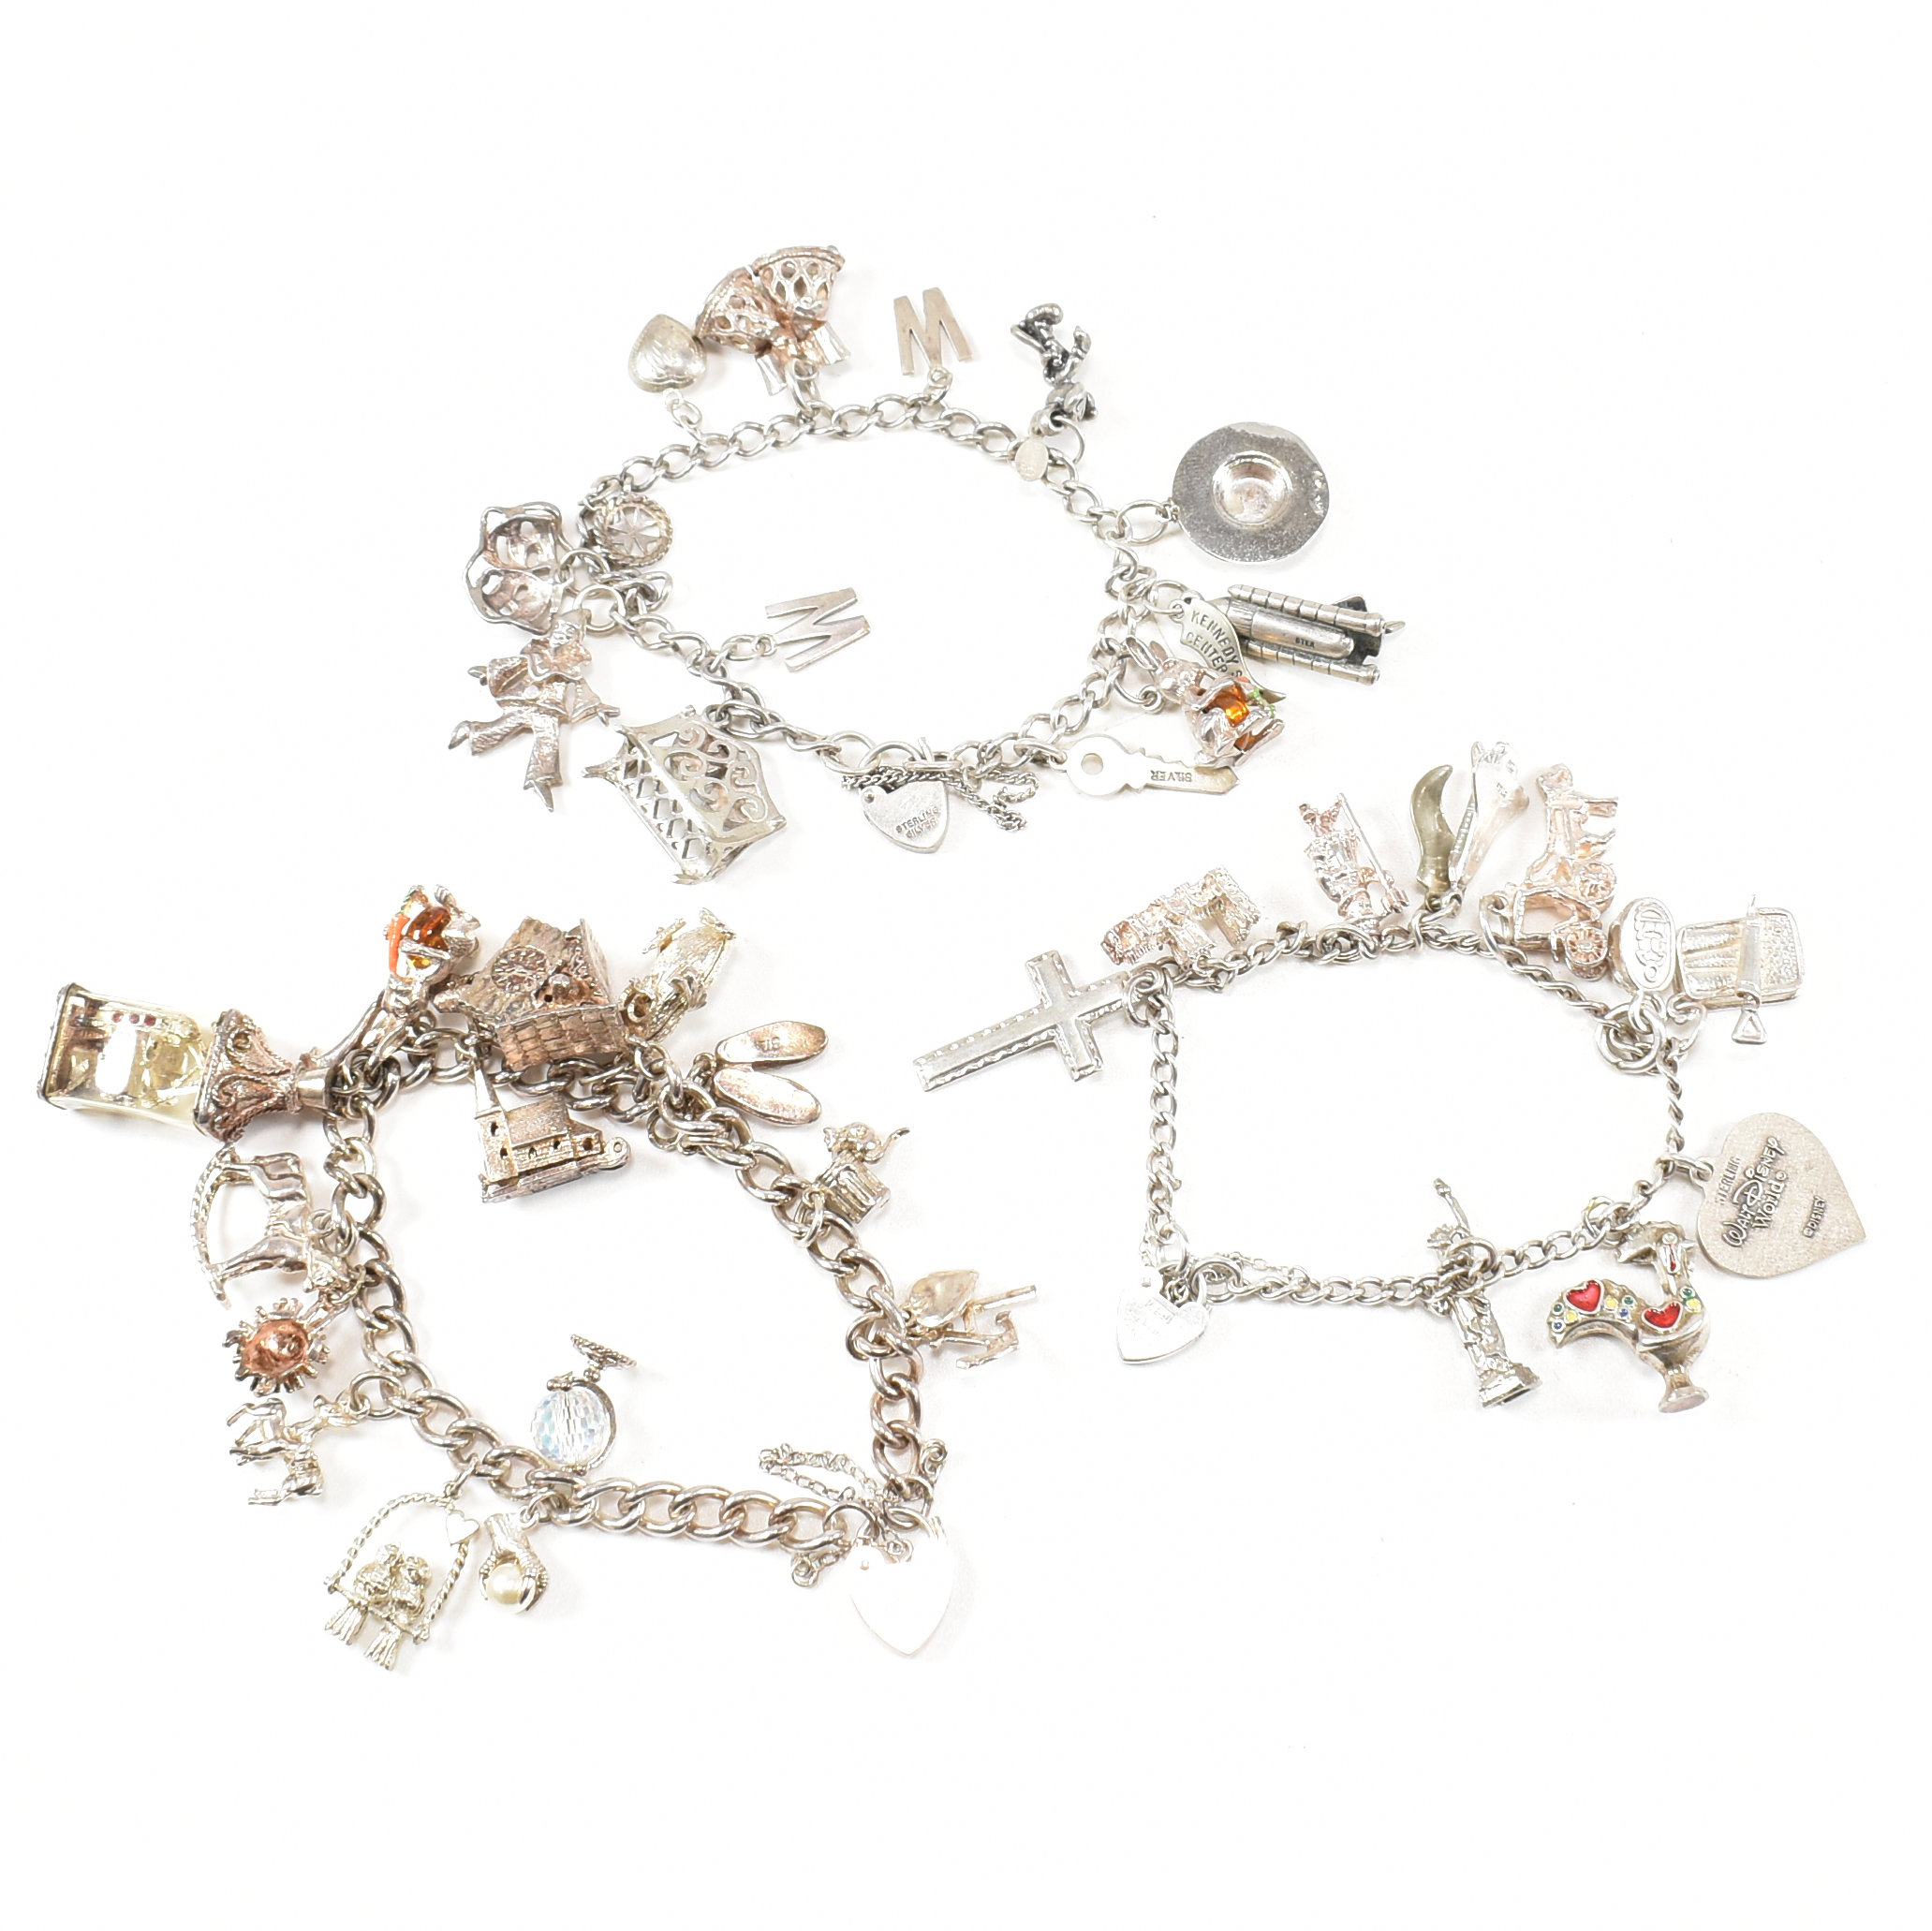 3 SILVER CHARM BRACELETS WITH SILVER & WHITE METAL CHARMS - Image 2 of 4